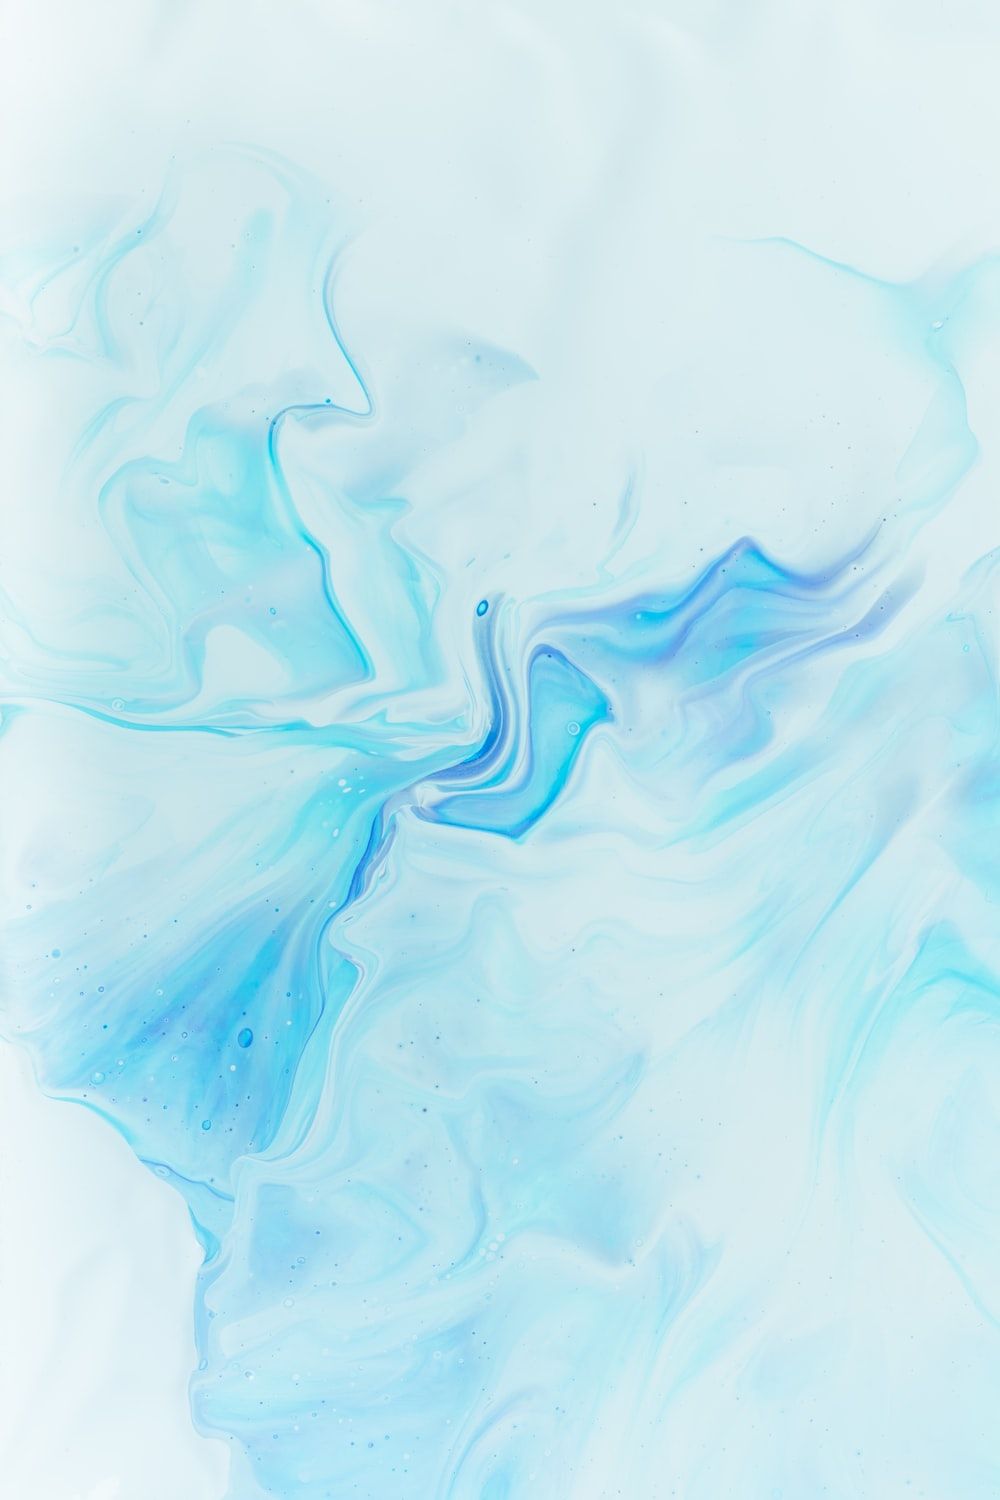 A wallpaper of a white and blue abstract painting - Cyan